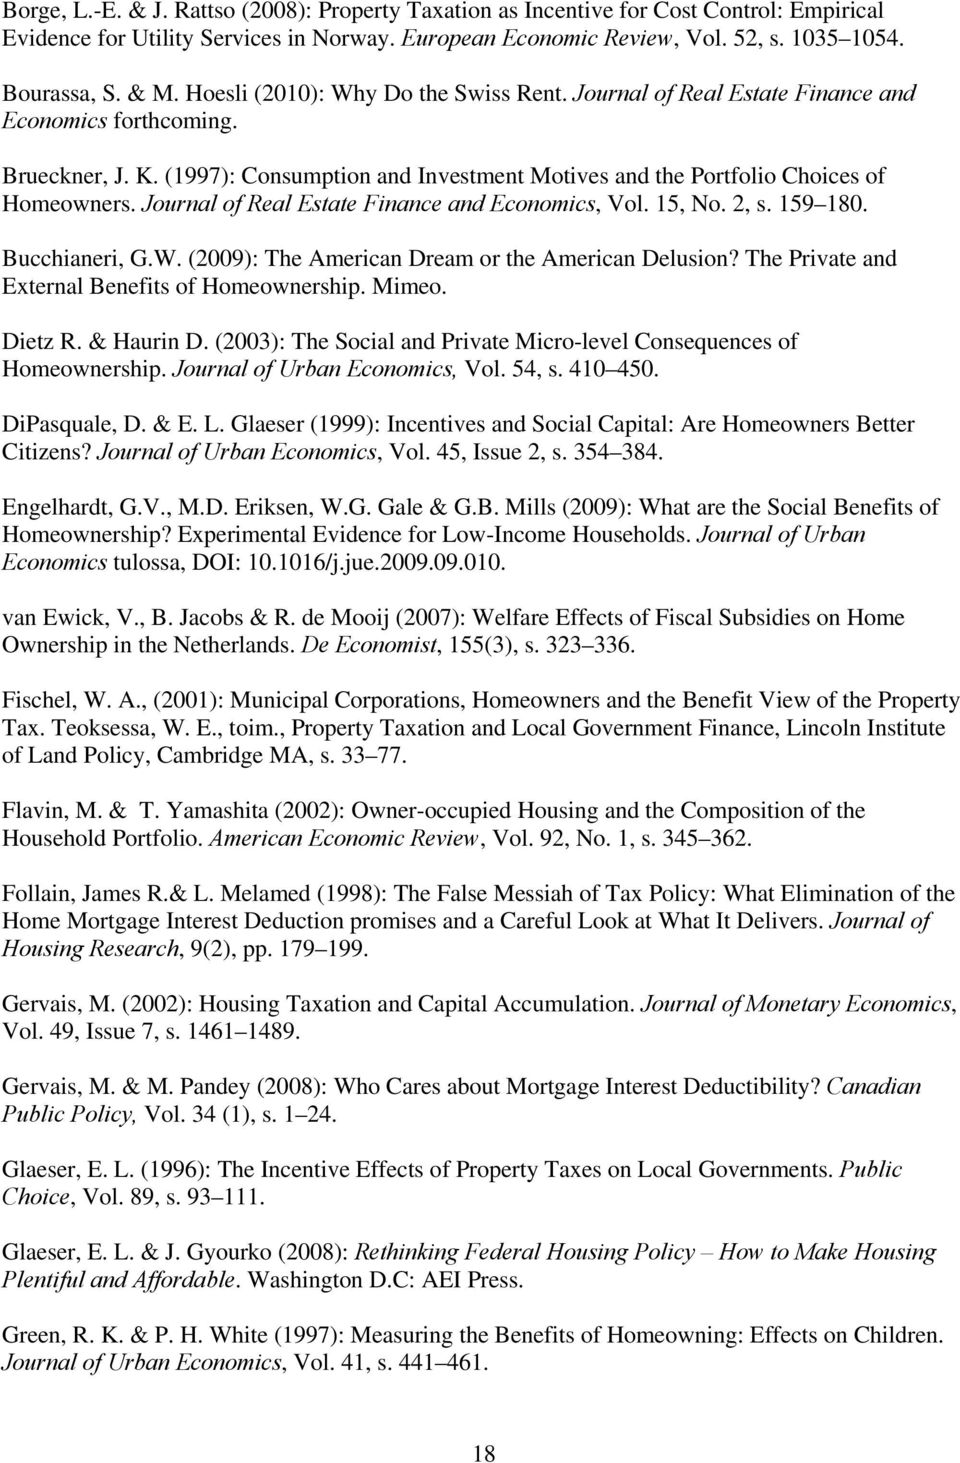 Journal of Real Estate Finance and Economics, Vol. 15, No. 2, s. 159 180. Bucchianeri, G.W. (2009): The American Dream or the American Delusion? The Private and External Benefits of Homeownership.